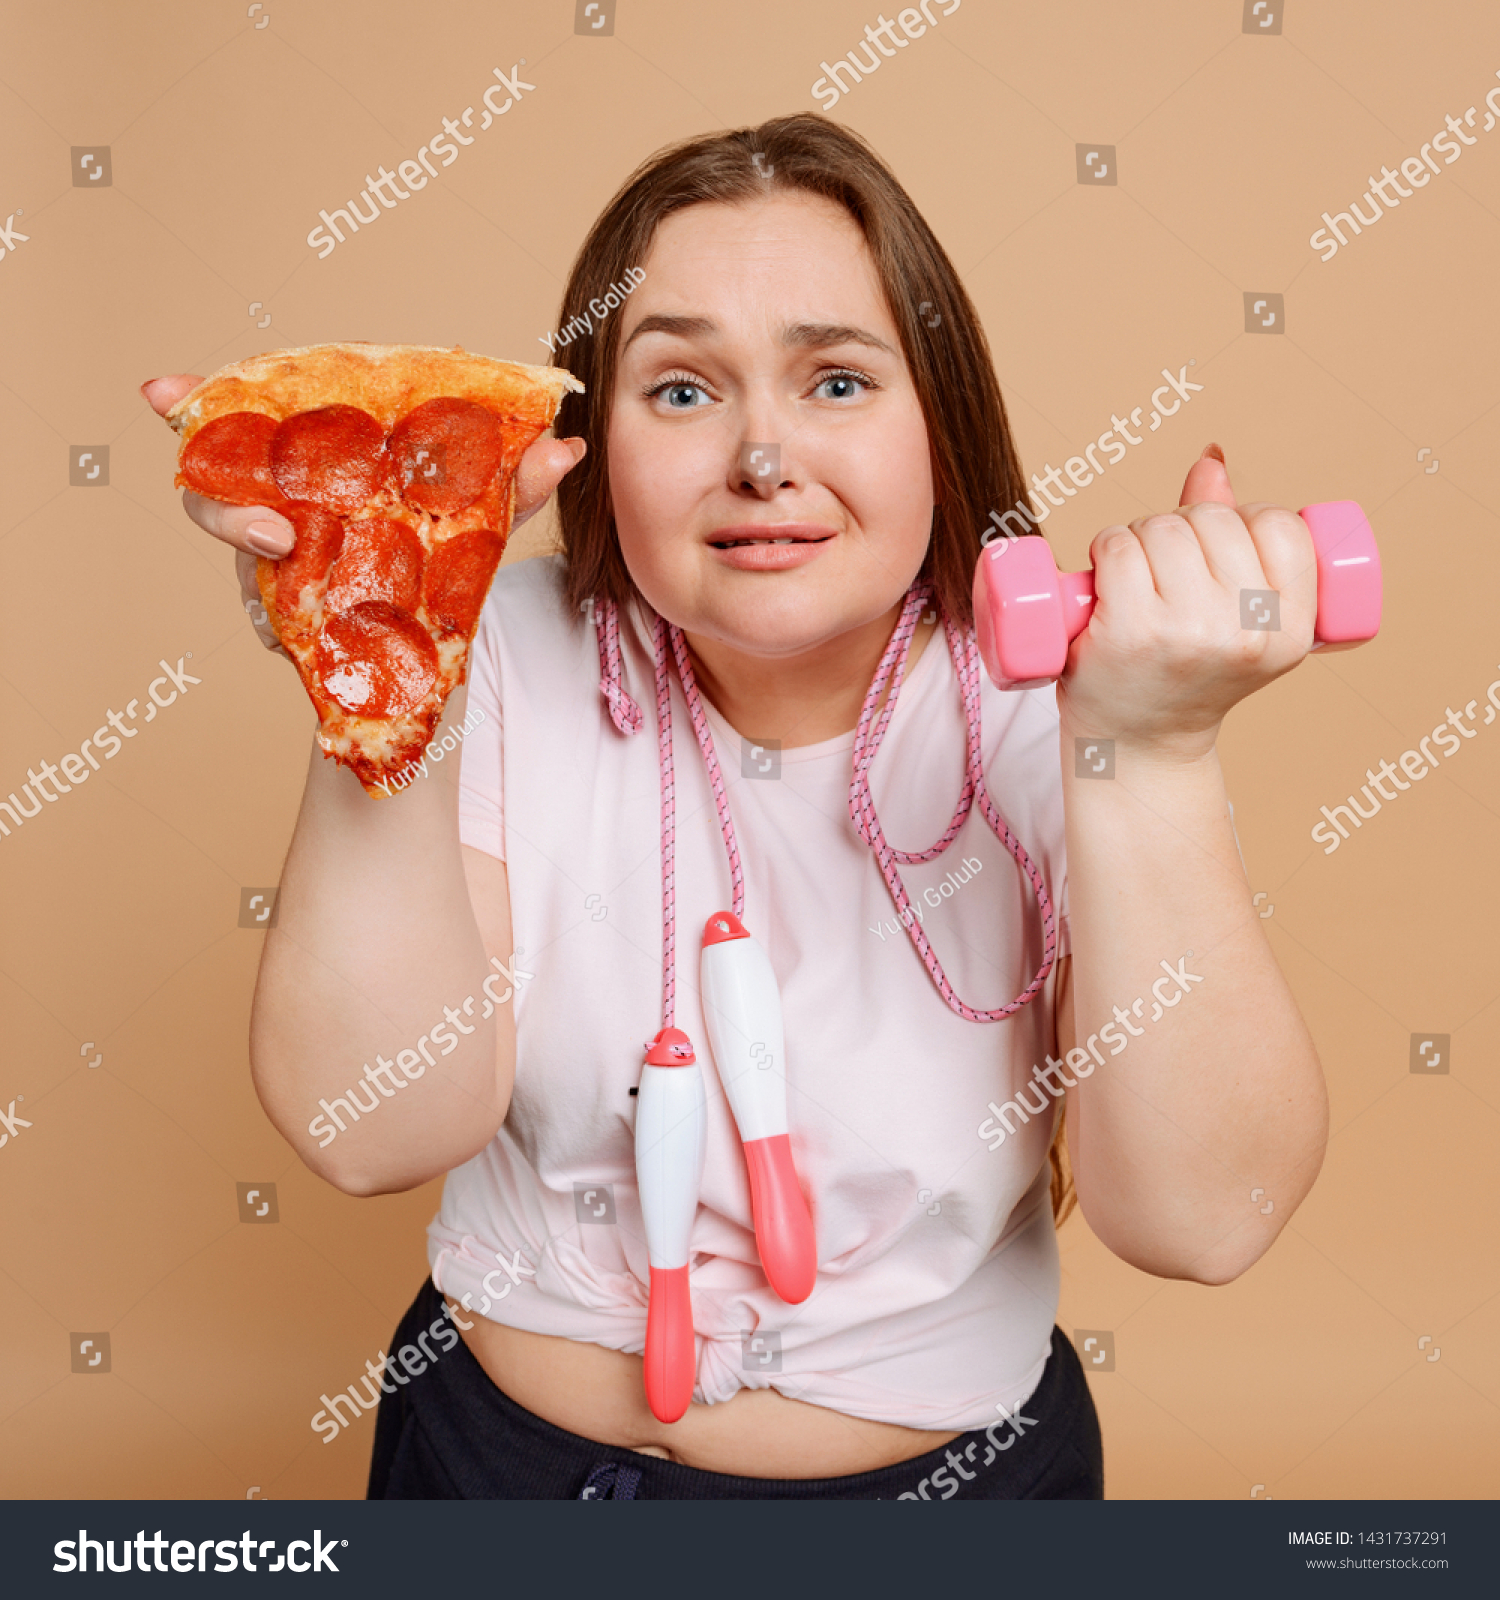 Fit pizza girl